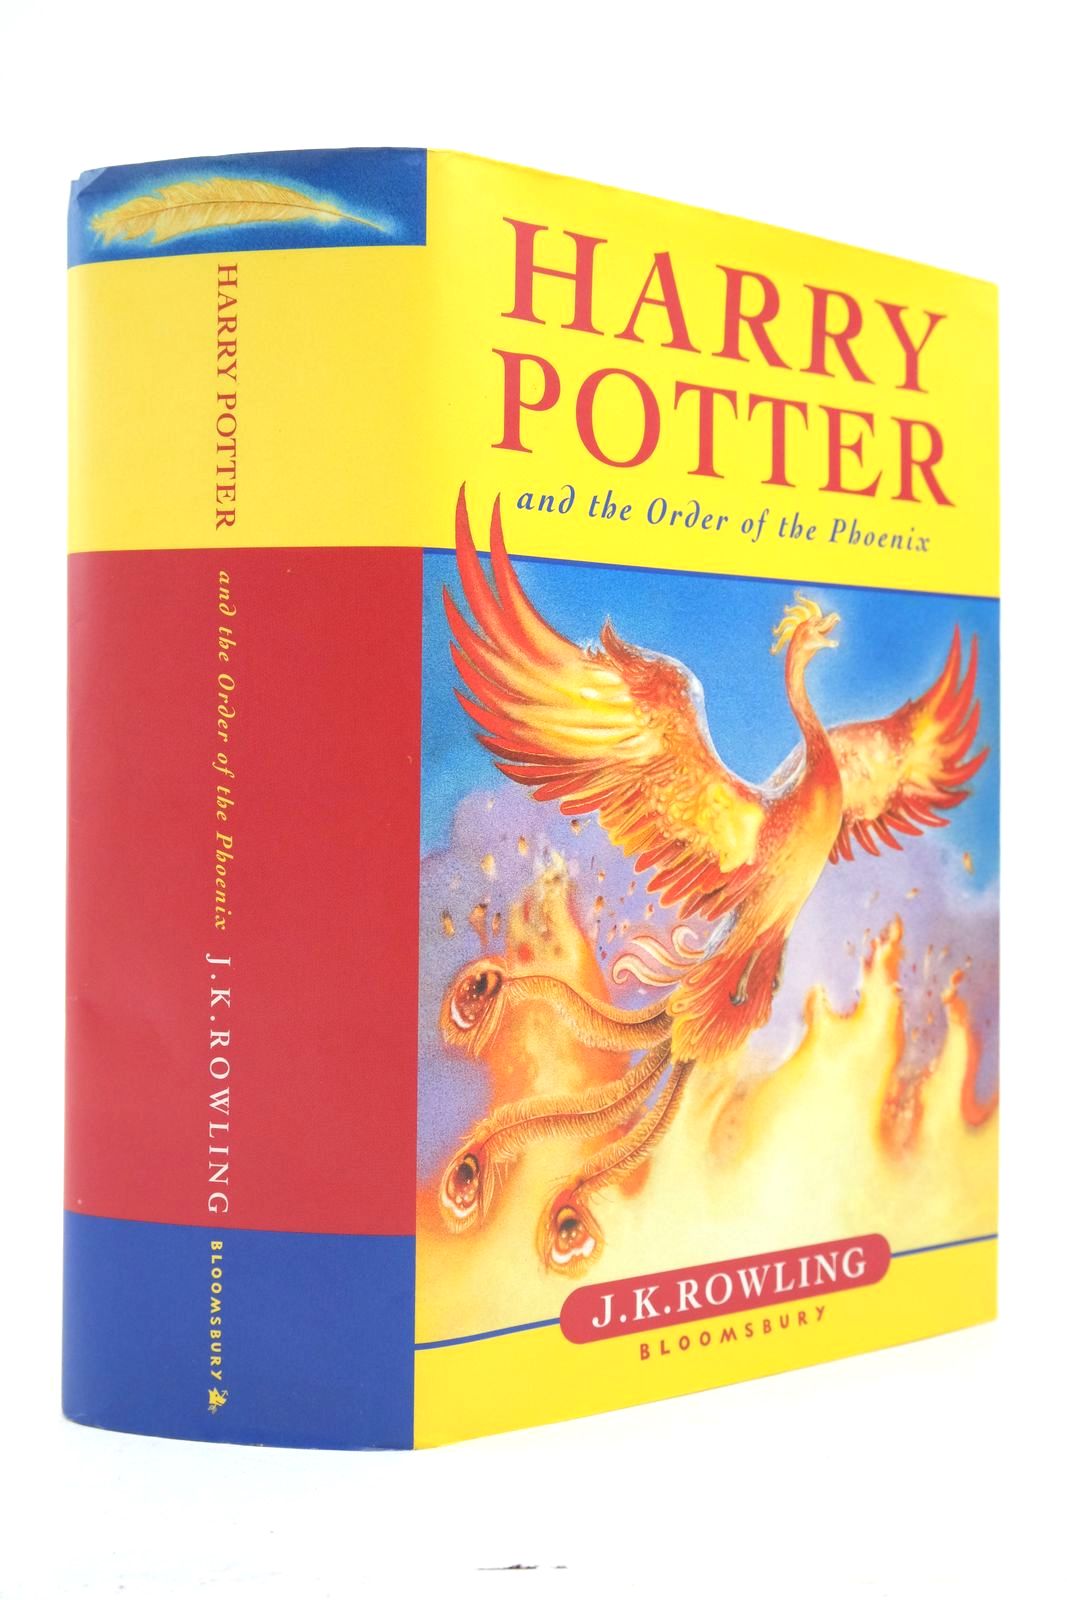 Photo of HARRY POTTER AND THE ORDER OF THE PHOENIX written by Rowling, J.K. published by Bloomsbury (STOCK CODE: 2139284)  for sale by Stella & Rose's Books